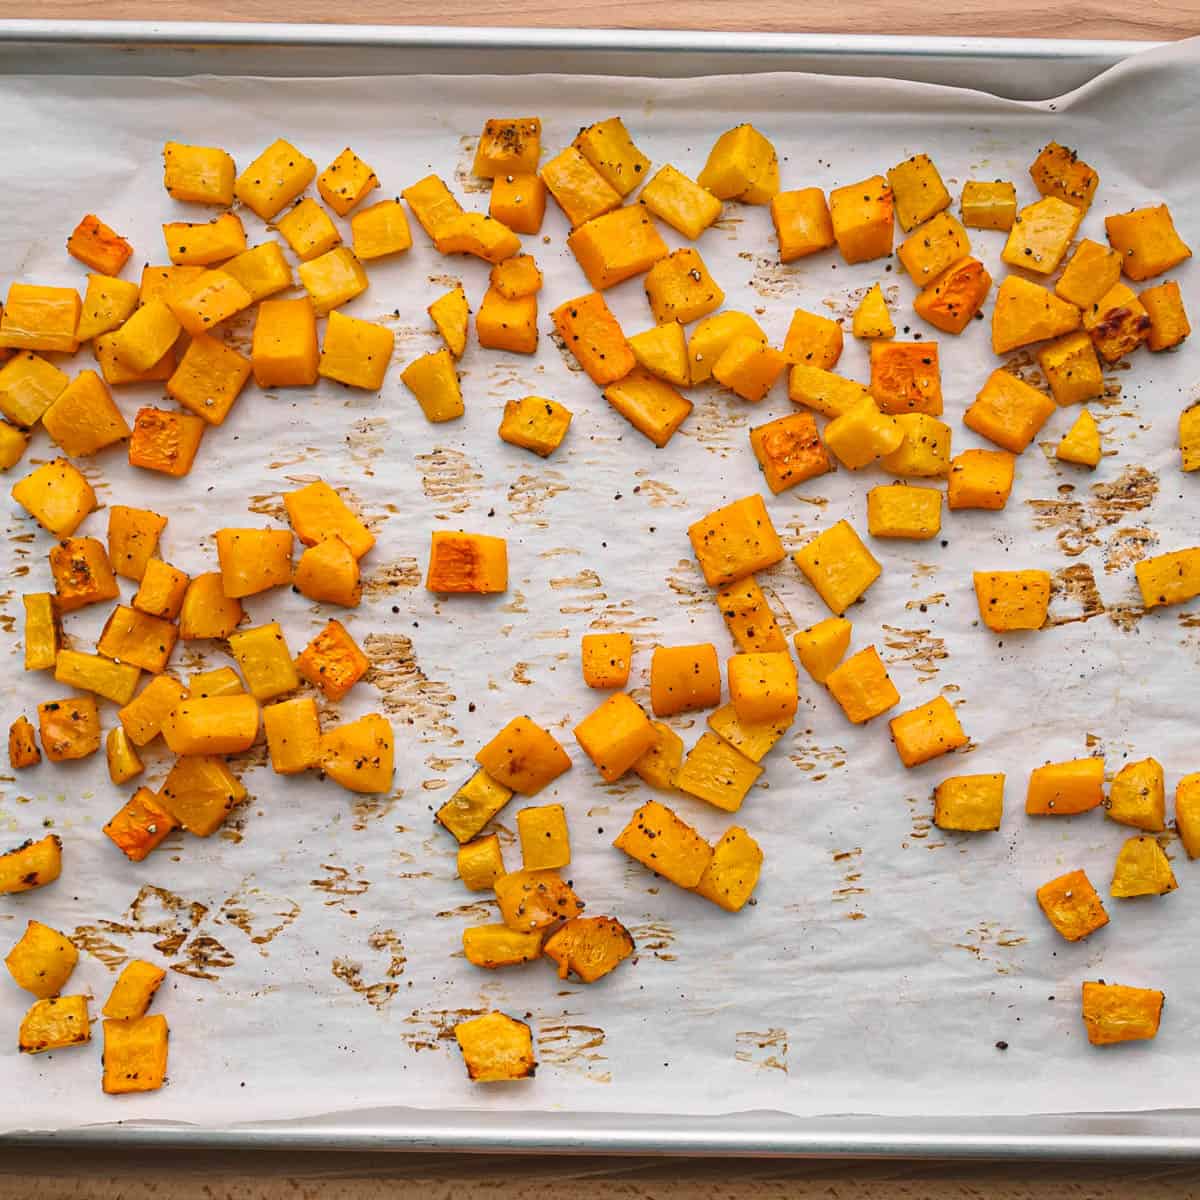  Now, transfer the mixture to a spacious baking sheet. Roast it in the oven for about 25-30 minutes.